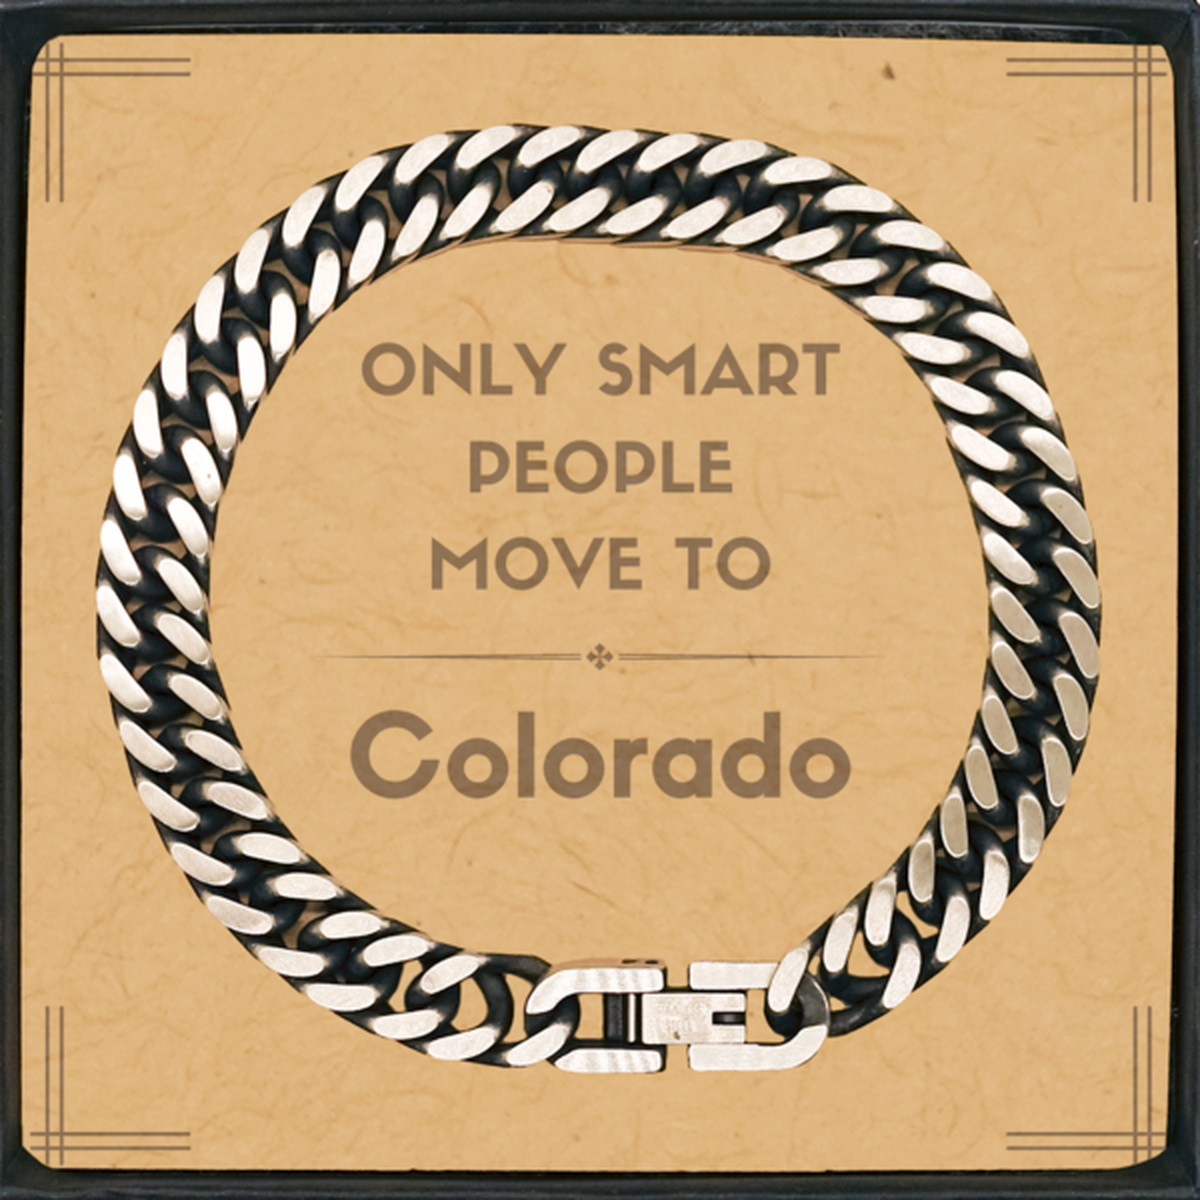 Only smart people move to Colorado Cuban Link Chain Bracelet, Message Card Gifts For Colorado, Move to Colorado Gifts for Friends Coworker Funny Saying Quote